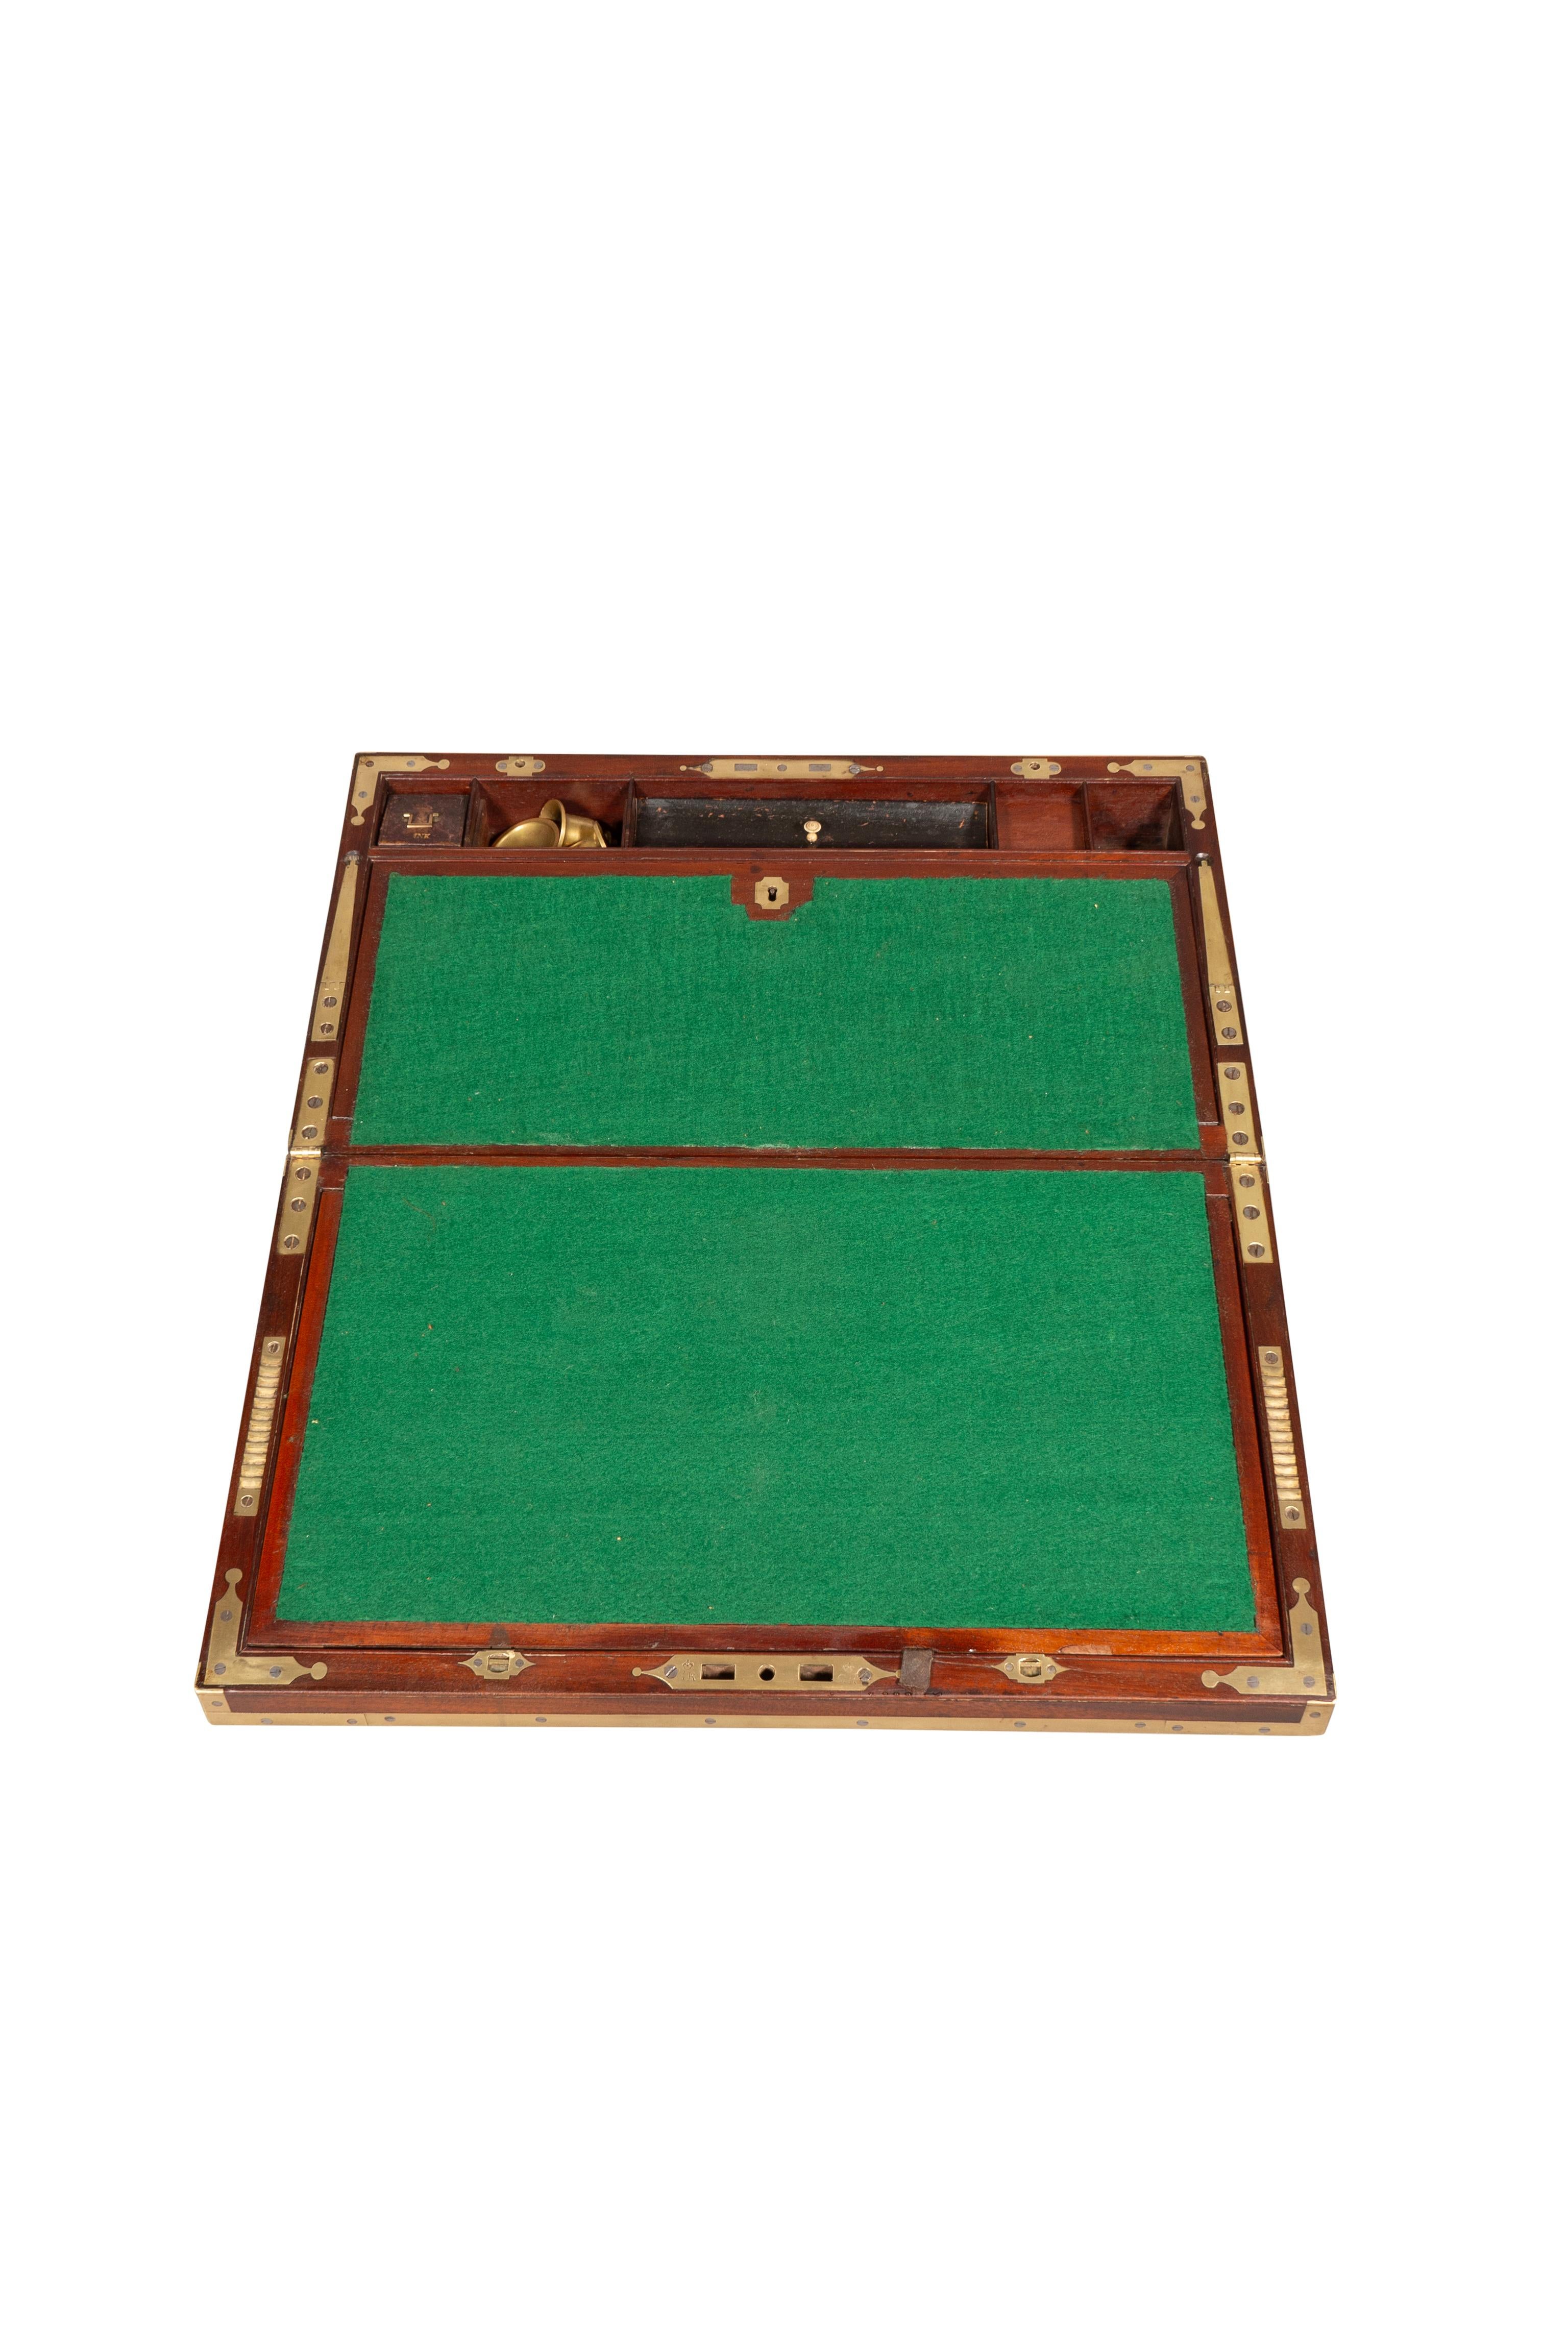 Regency Mahogany And Brass Inlaid Campaign Box On Stand 4